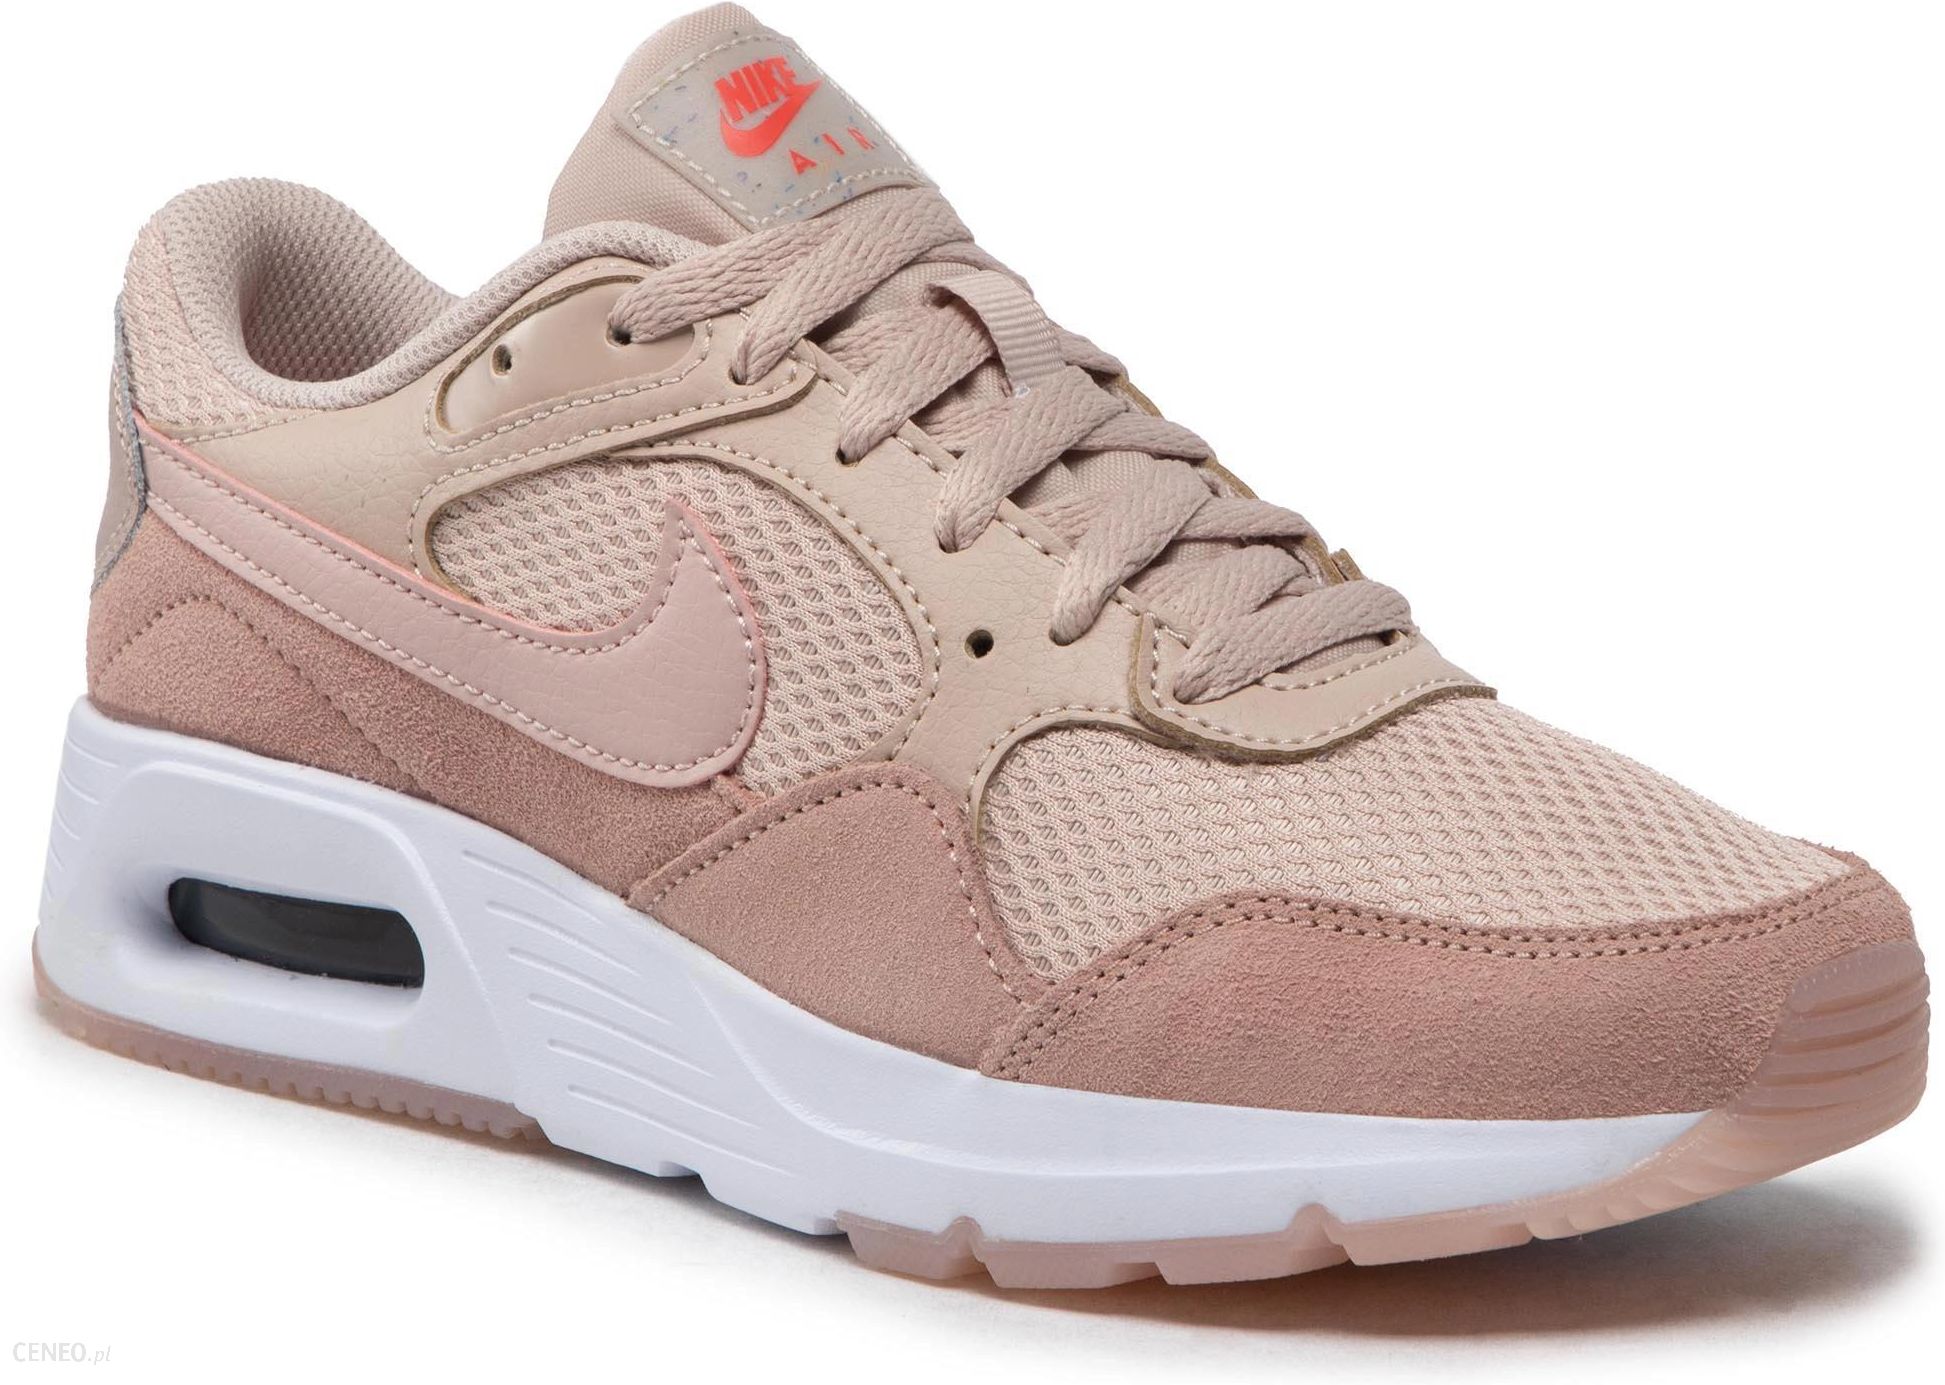 Buty NIKE - Air Max Sc CW4554 201 Fossil Stone/Pink Oxford - Ceny i opinie  